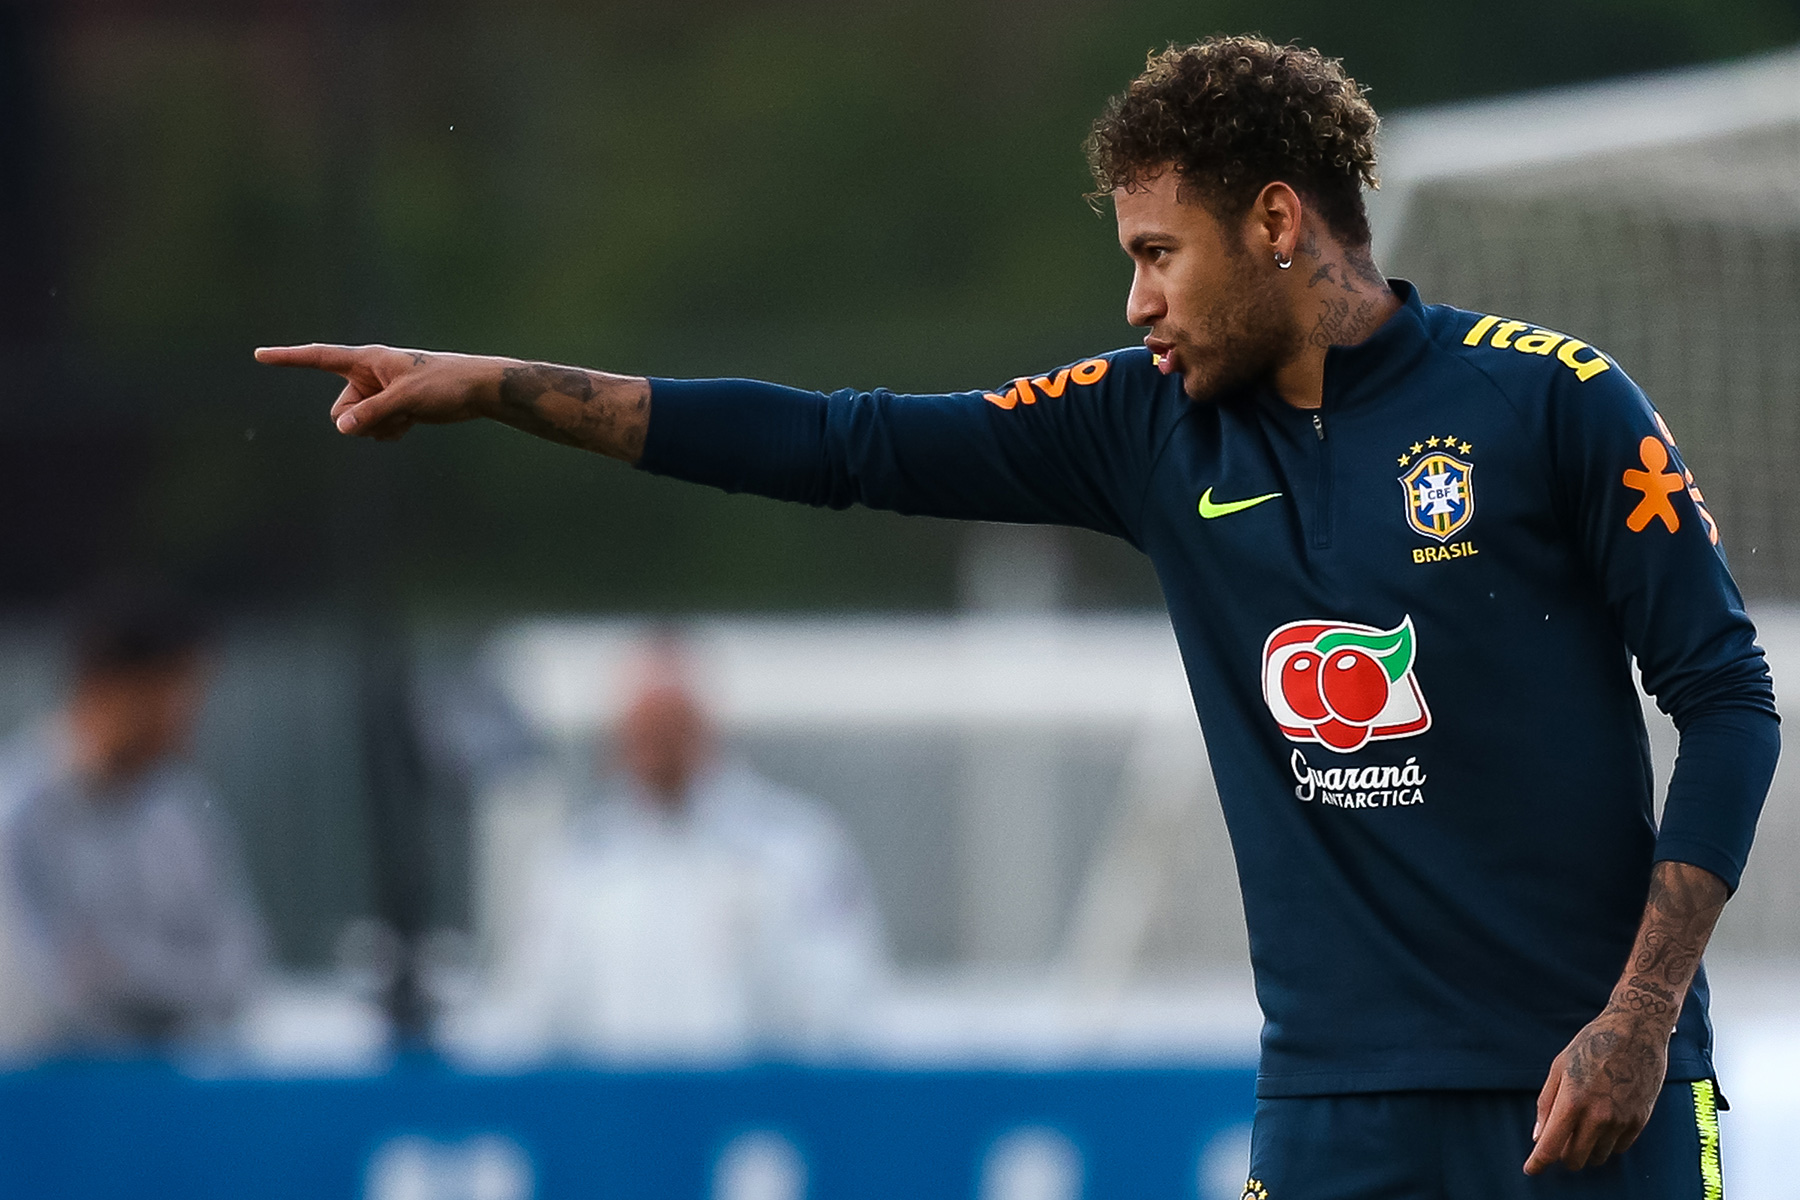 Video: Neymar Shown in Discomfort Over Lower Back Injury During ...